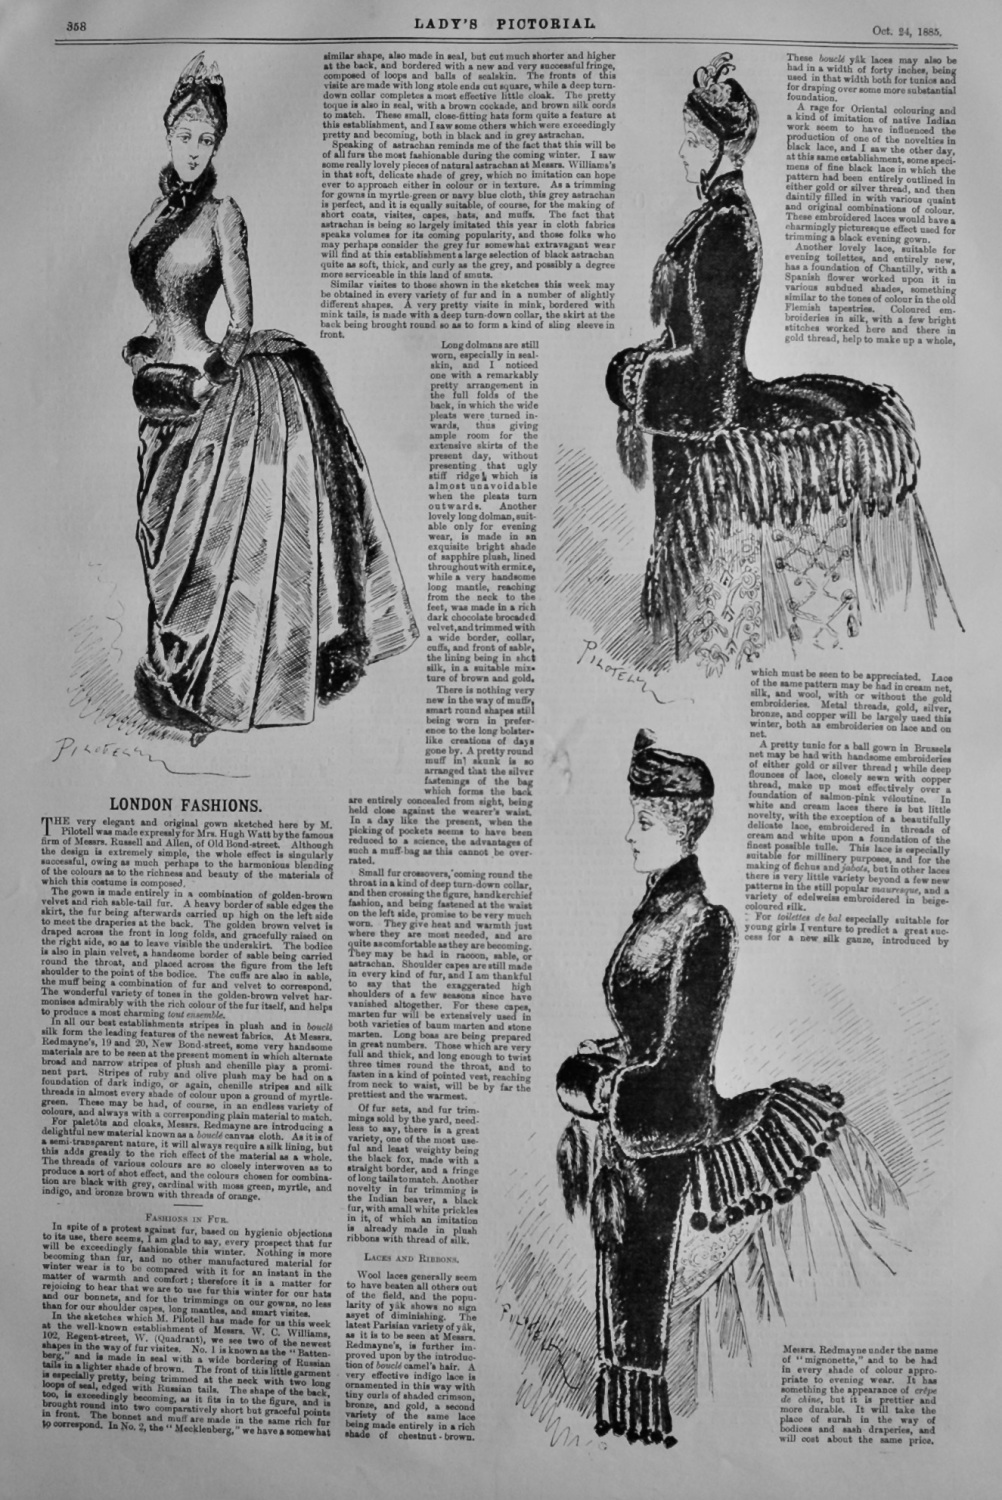 London Fashions. October 24th, 1885.